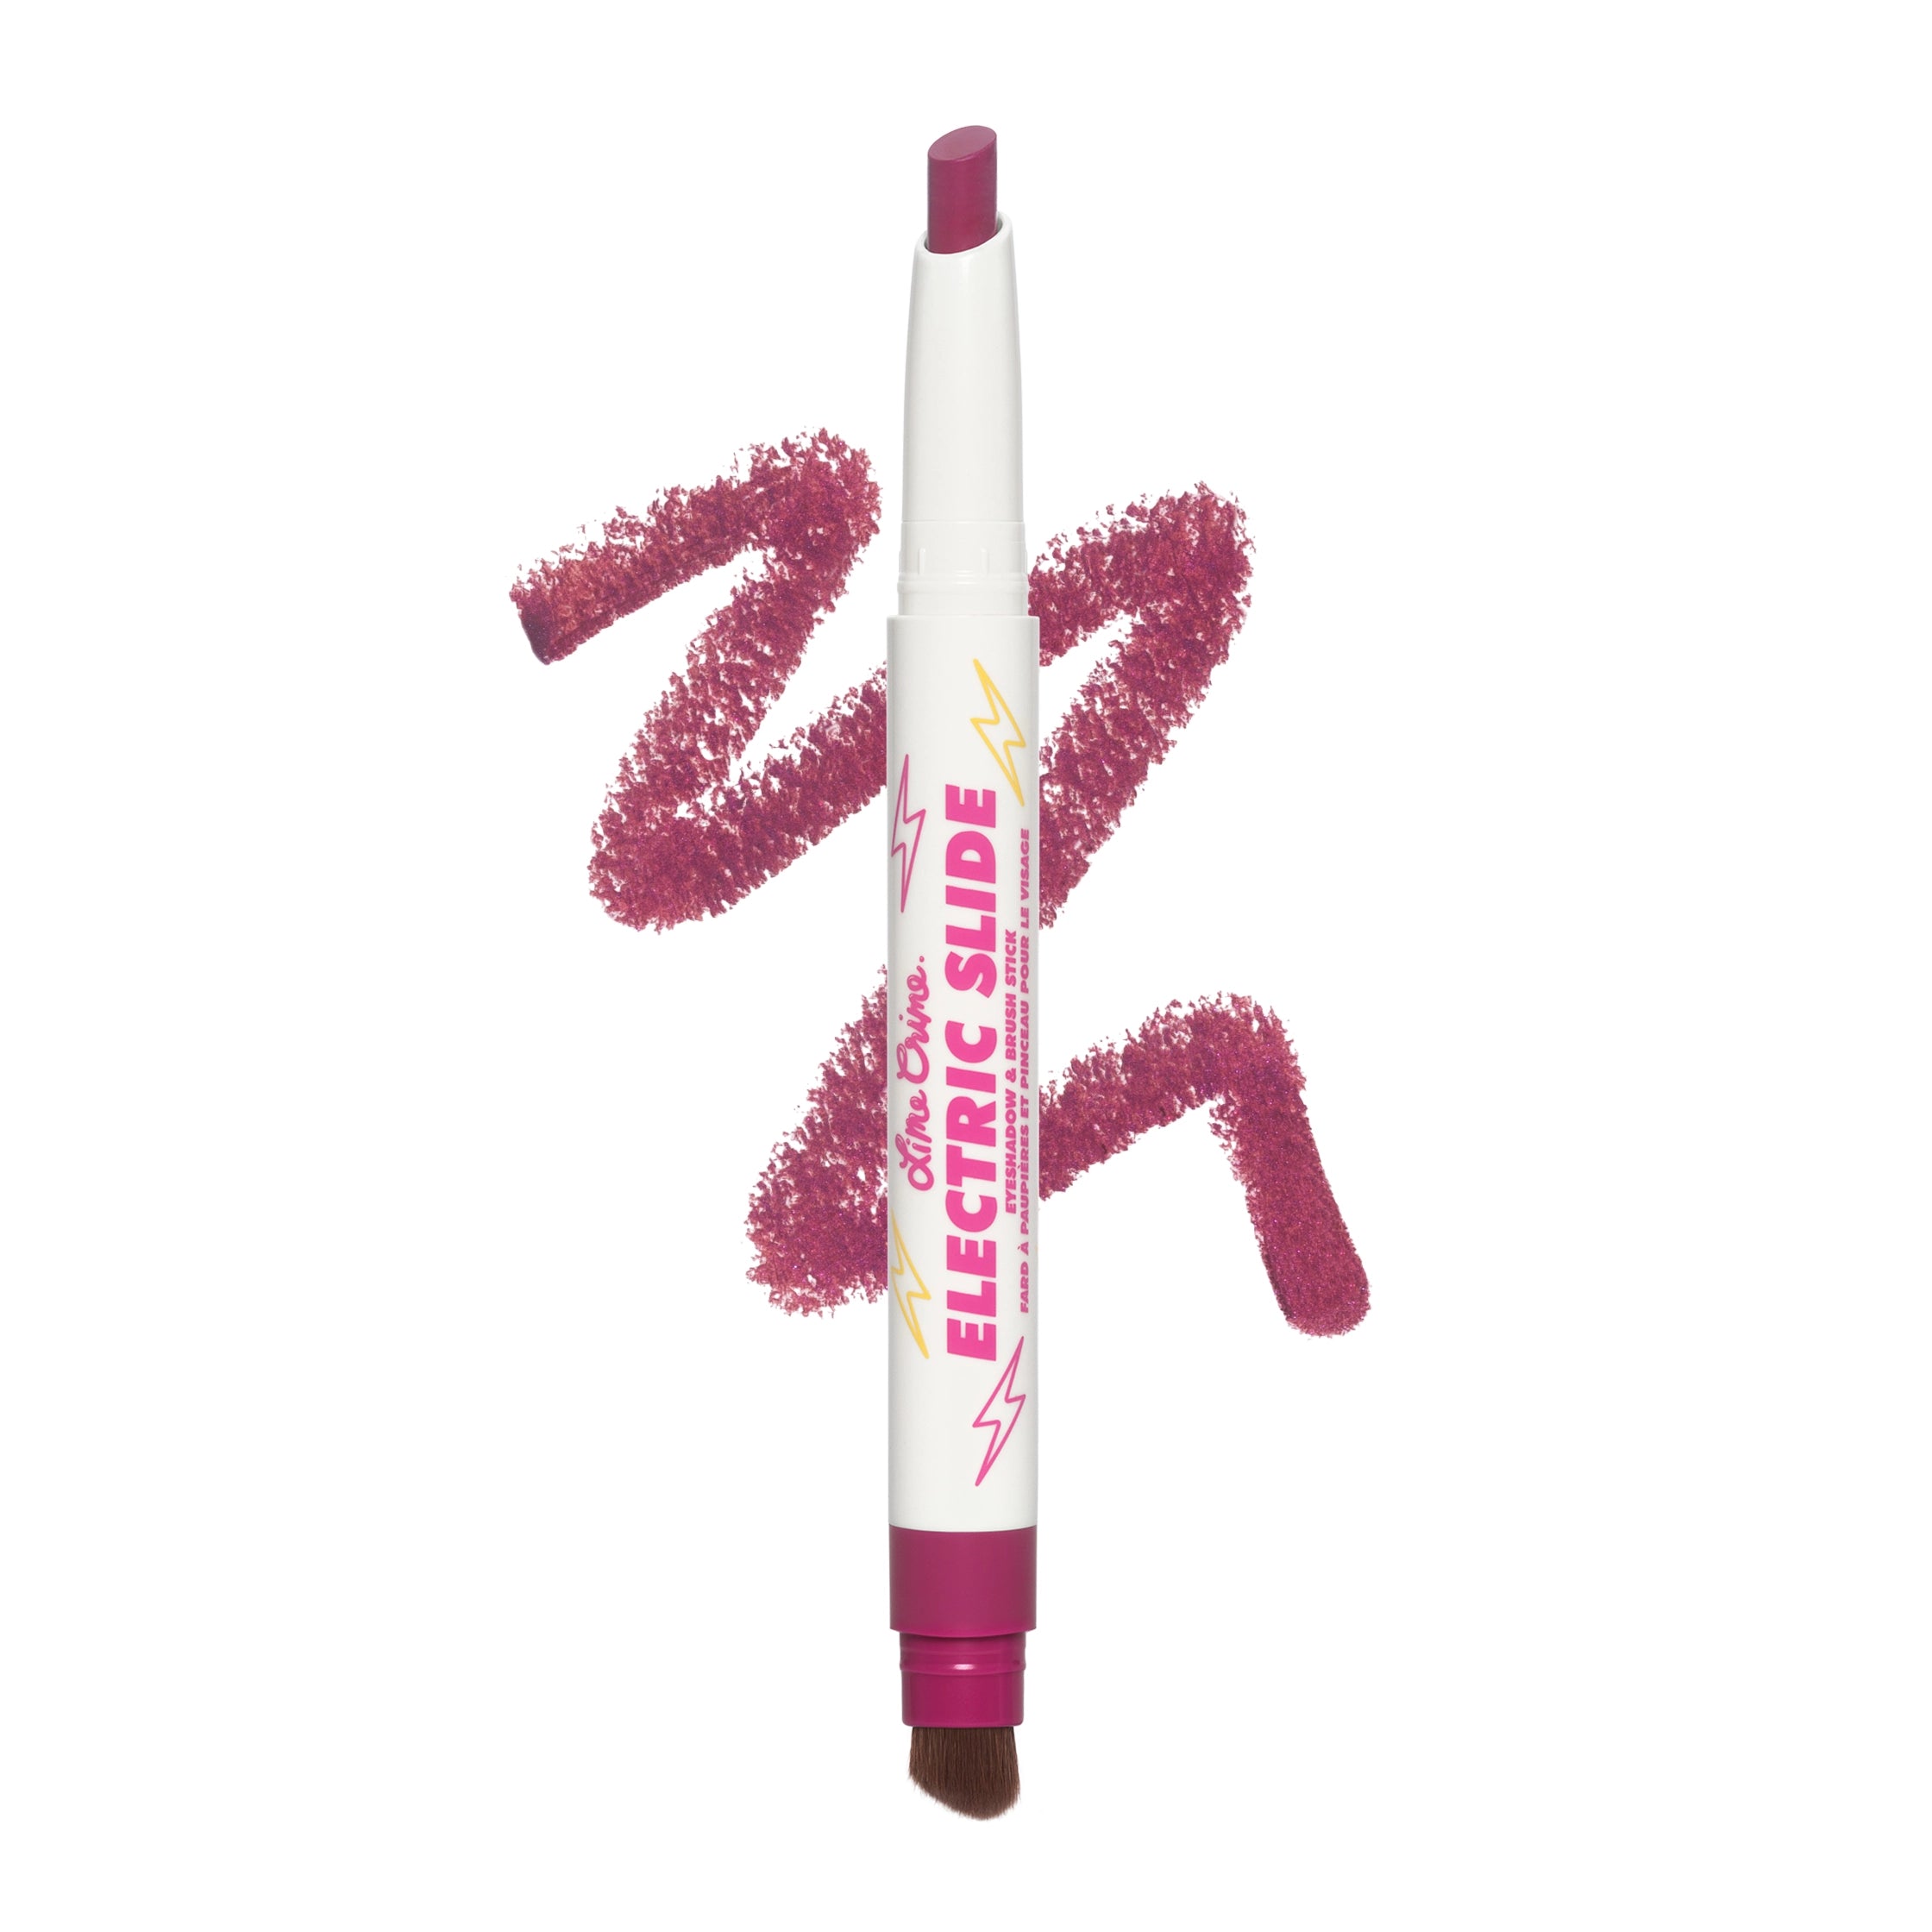 Electric Slide Eyeshadow & Smudge Sticks variant:As If